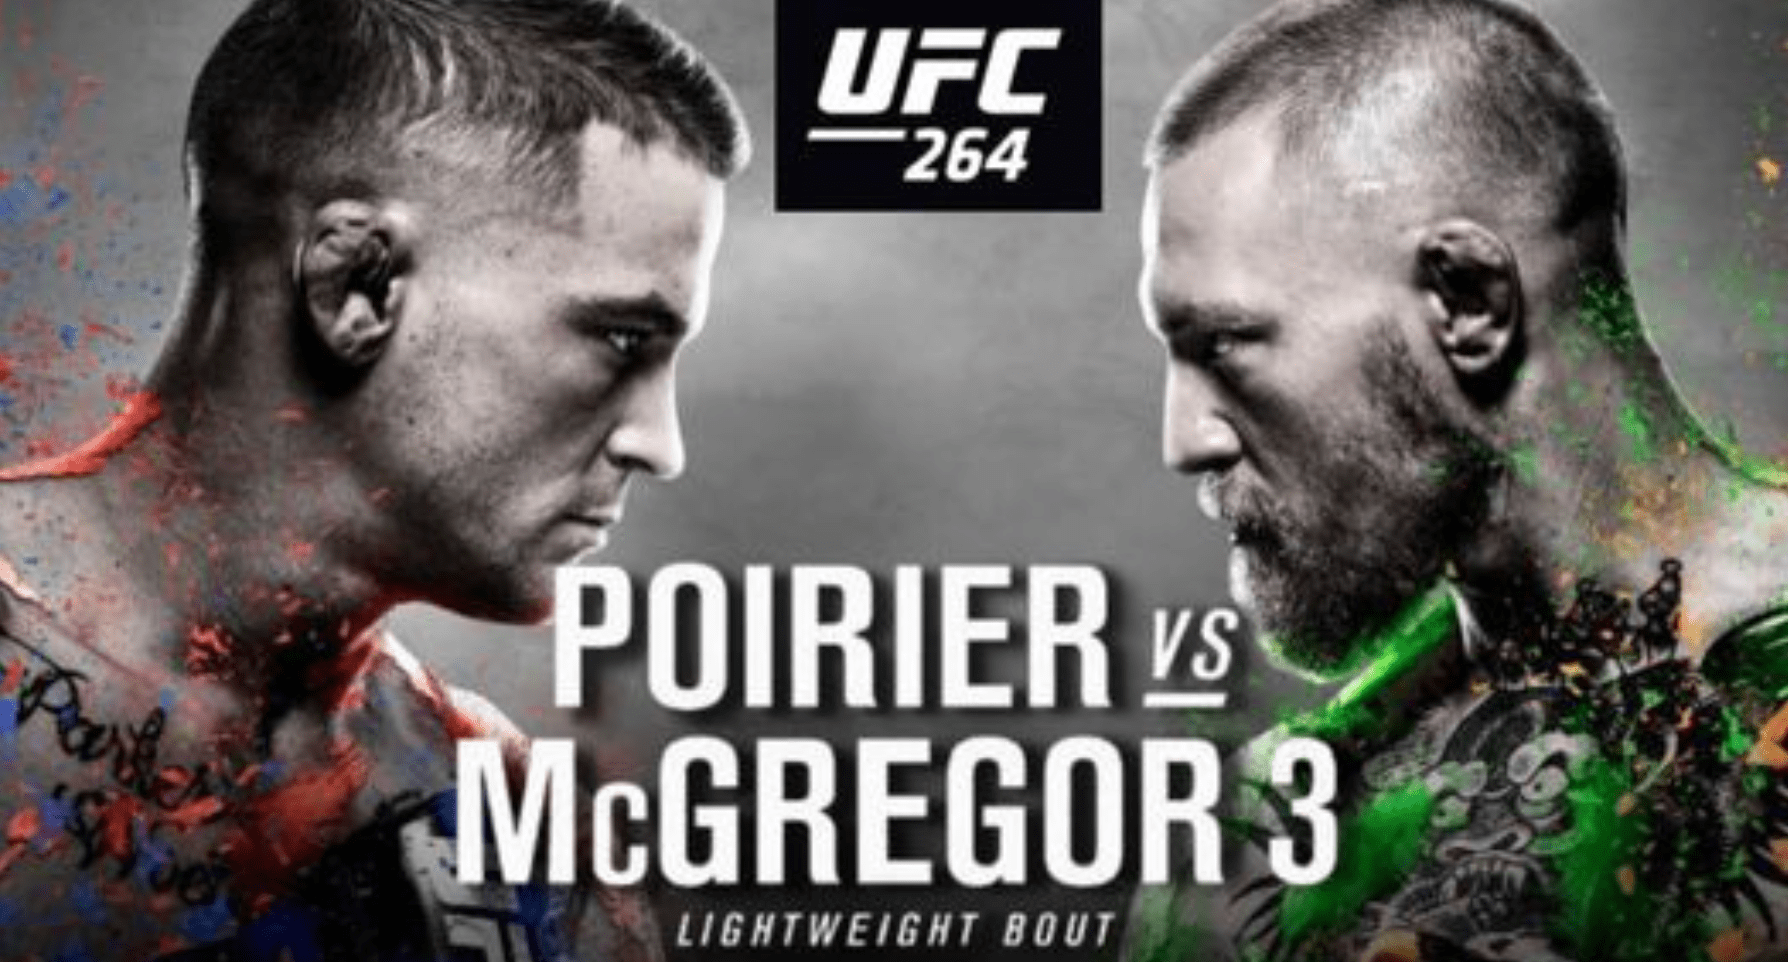 UFC 264: Poirier vs McGregor 3 Results And Post Fight Videos